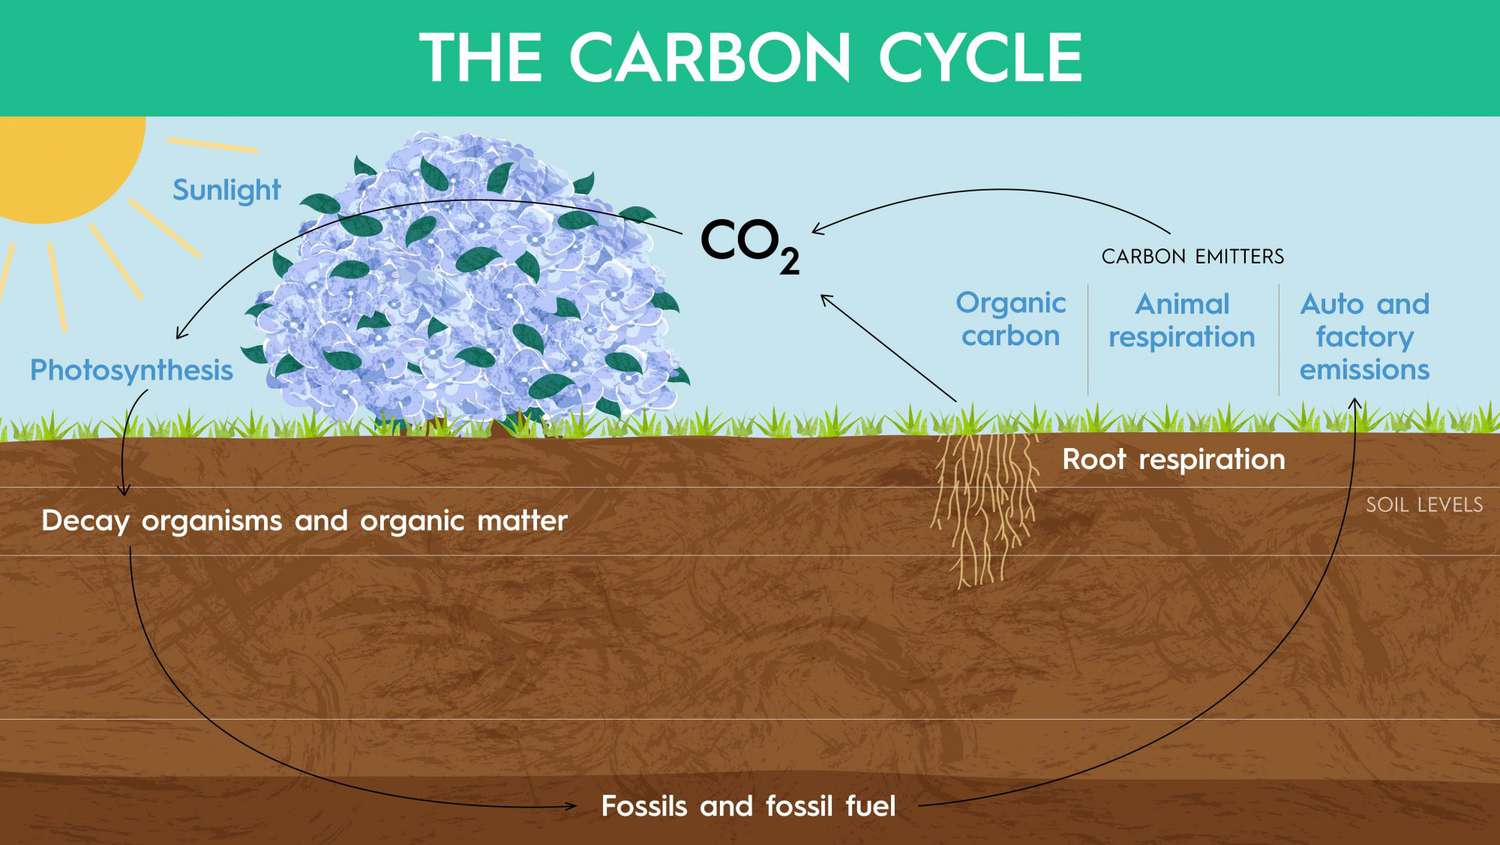 illustration of carbon cycle with sun, plants, soil